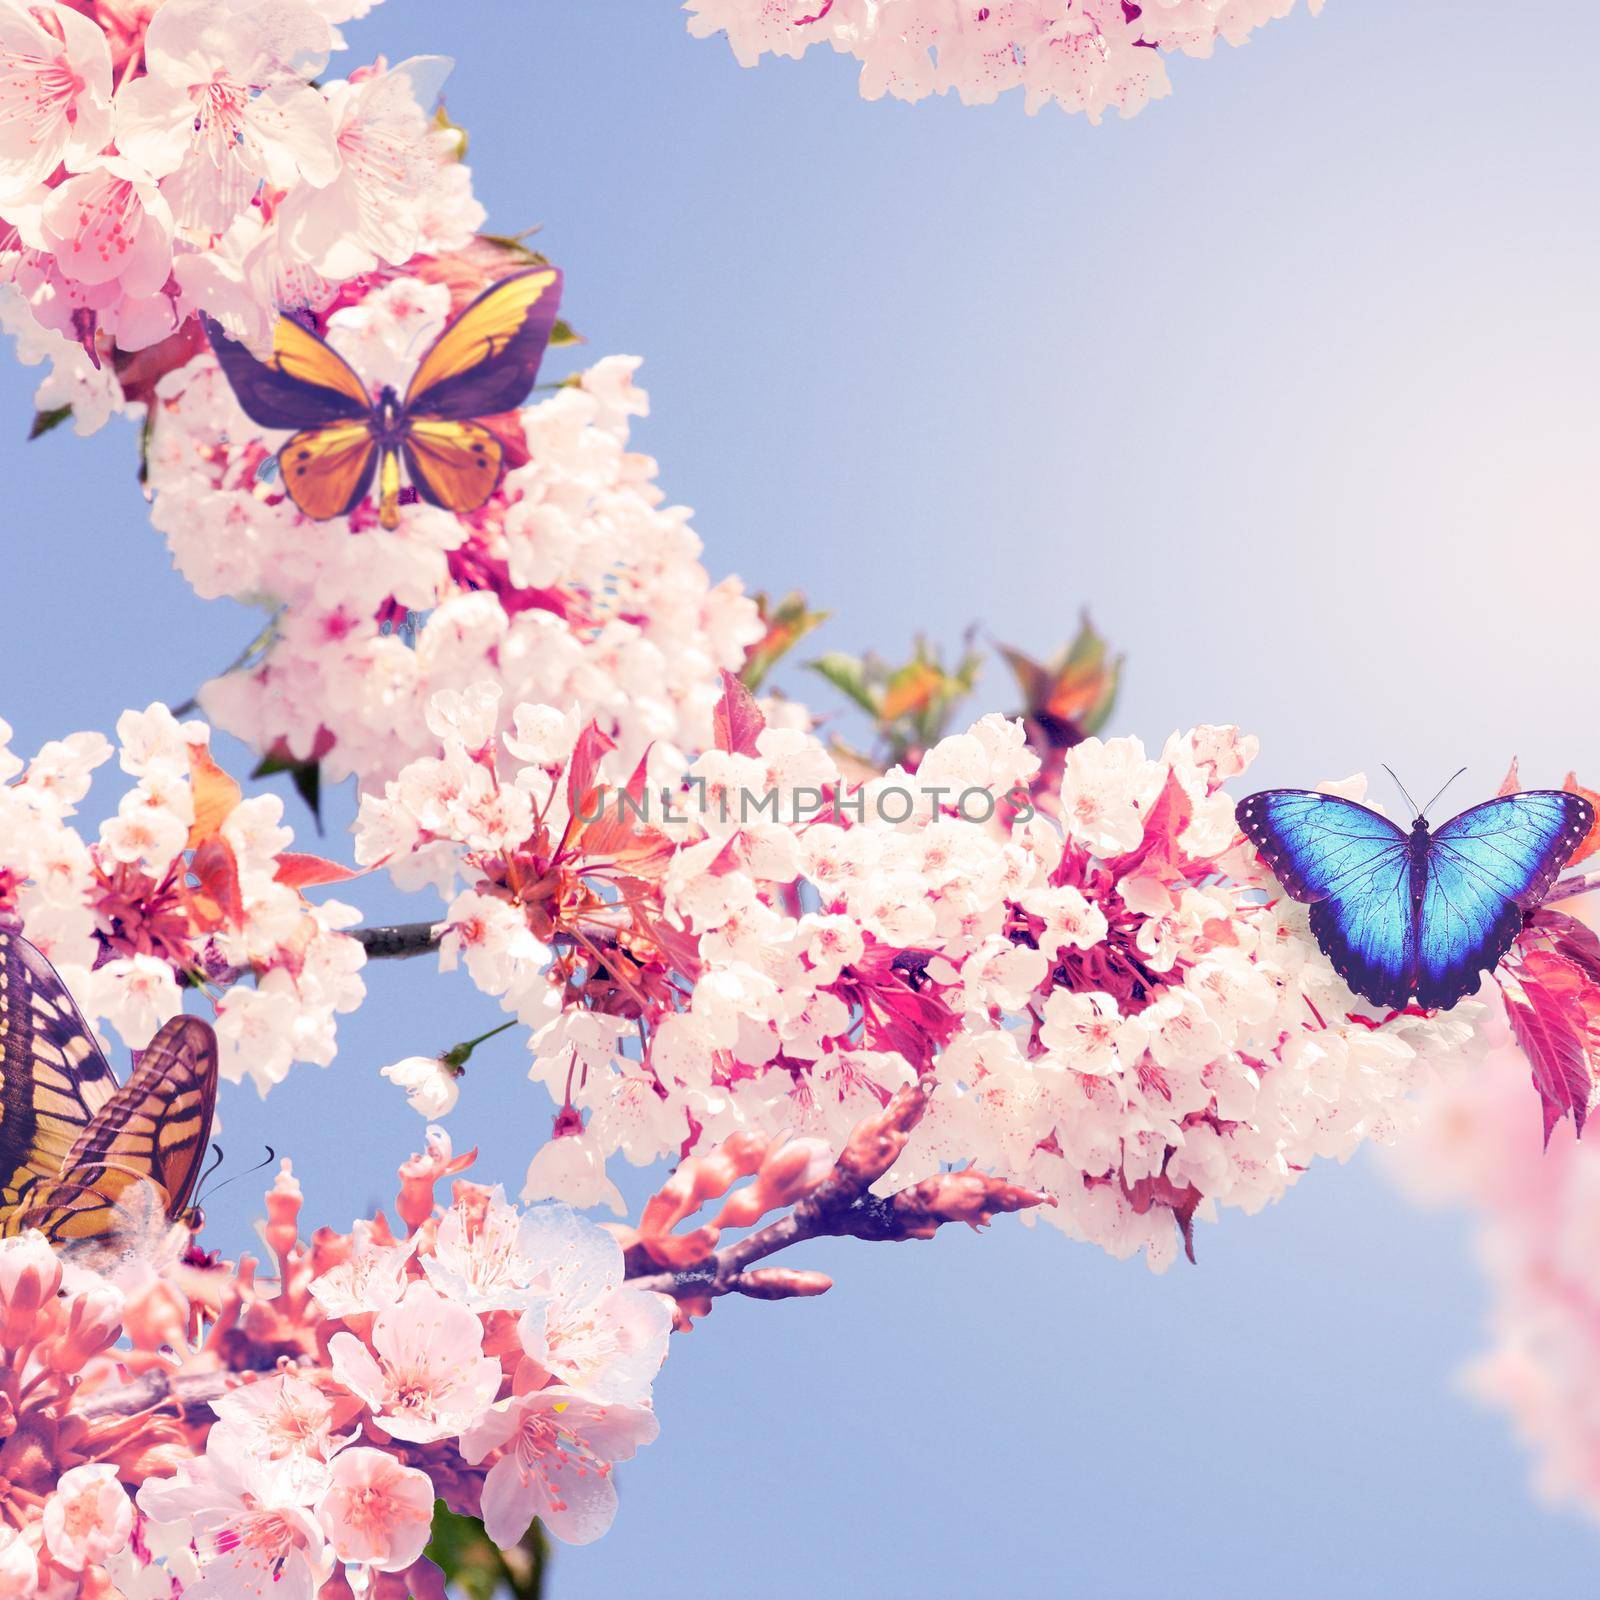 Butterfly and a beautiful nature view of spring flowering trees on blurred background. by Taut